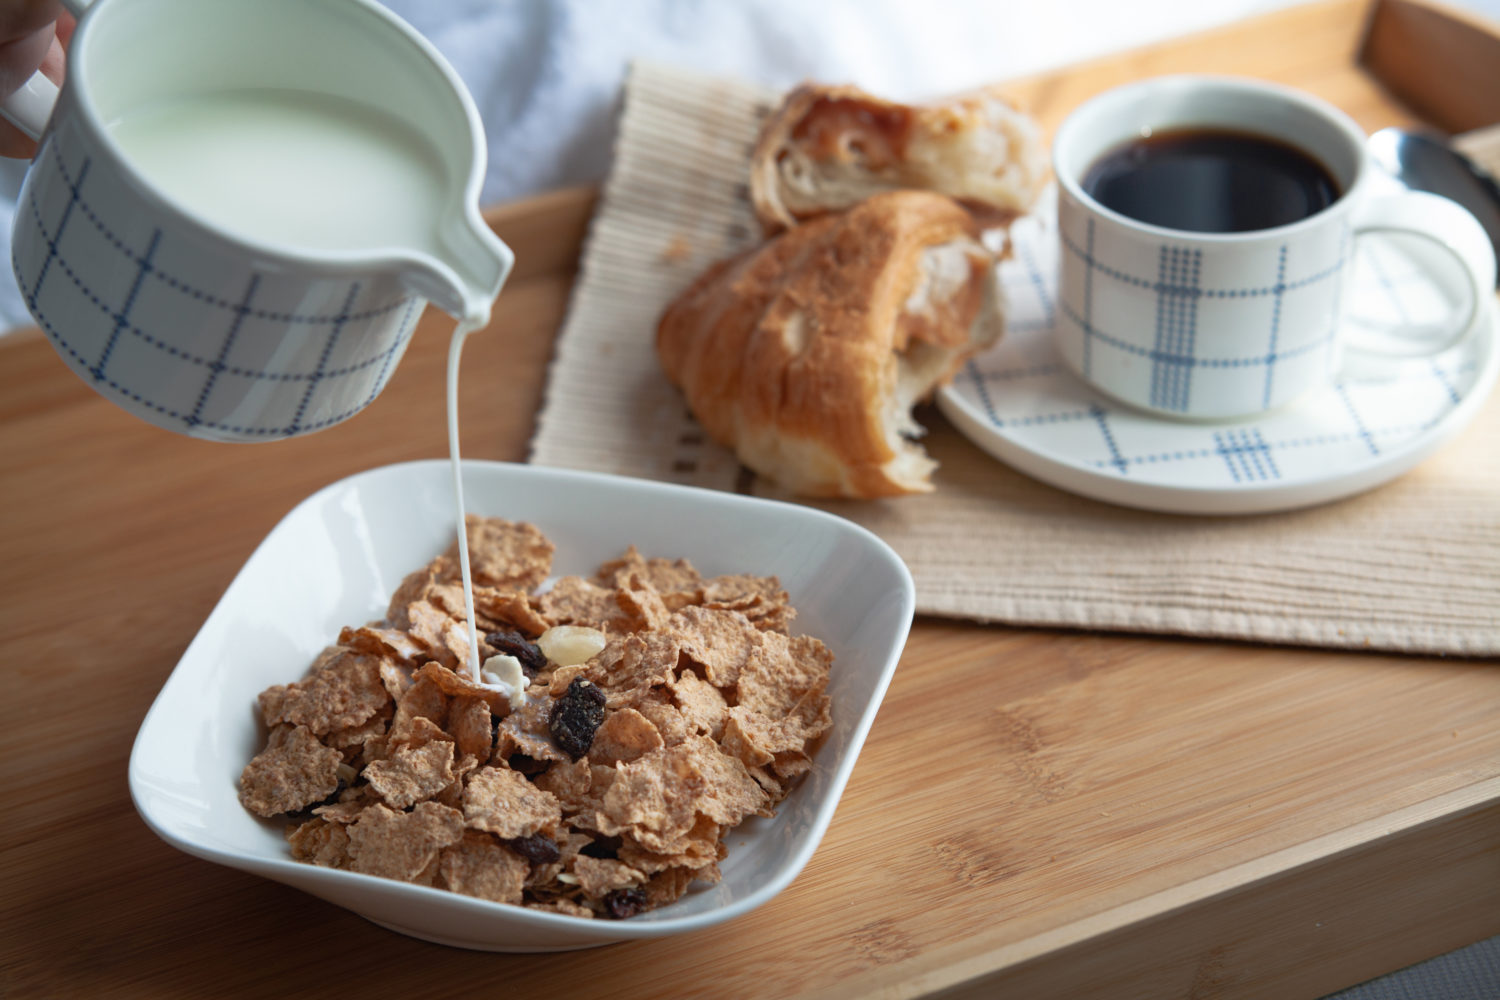 A small container of milk pouring into cereal next to a croissant and coffee